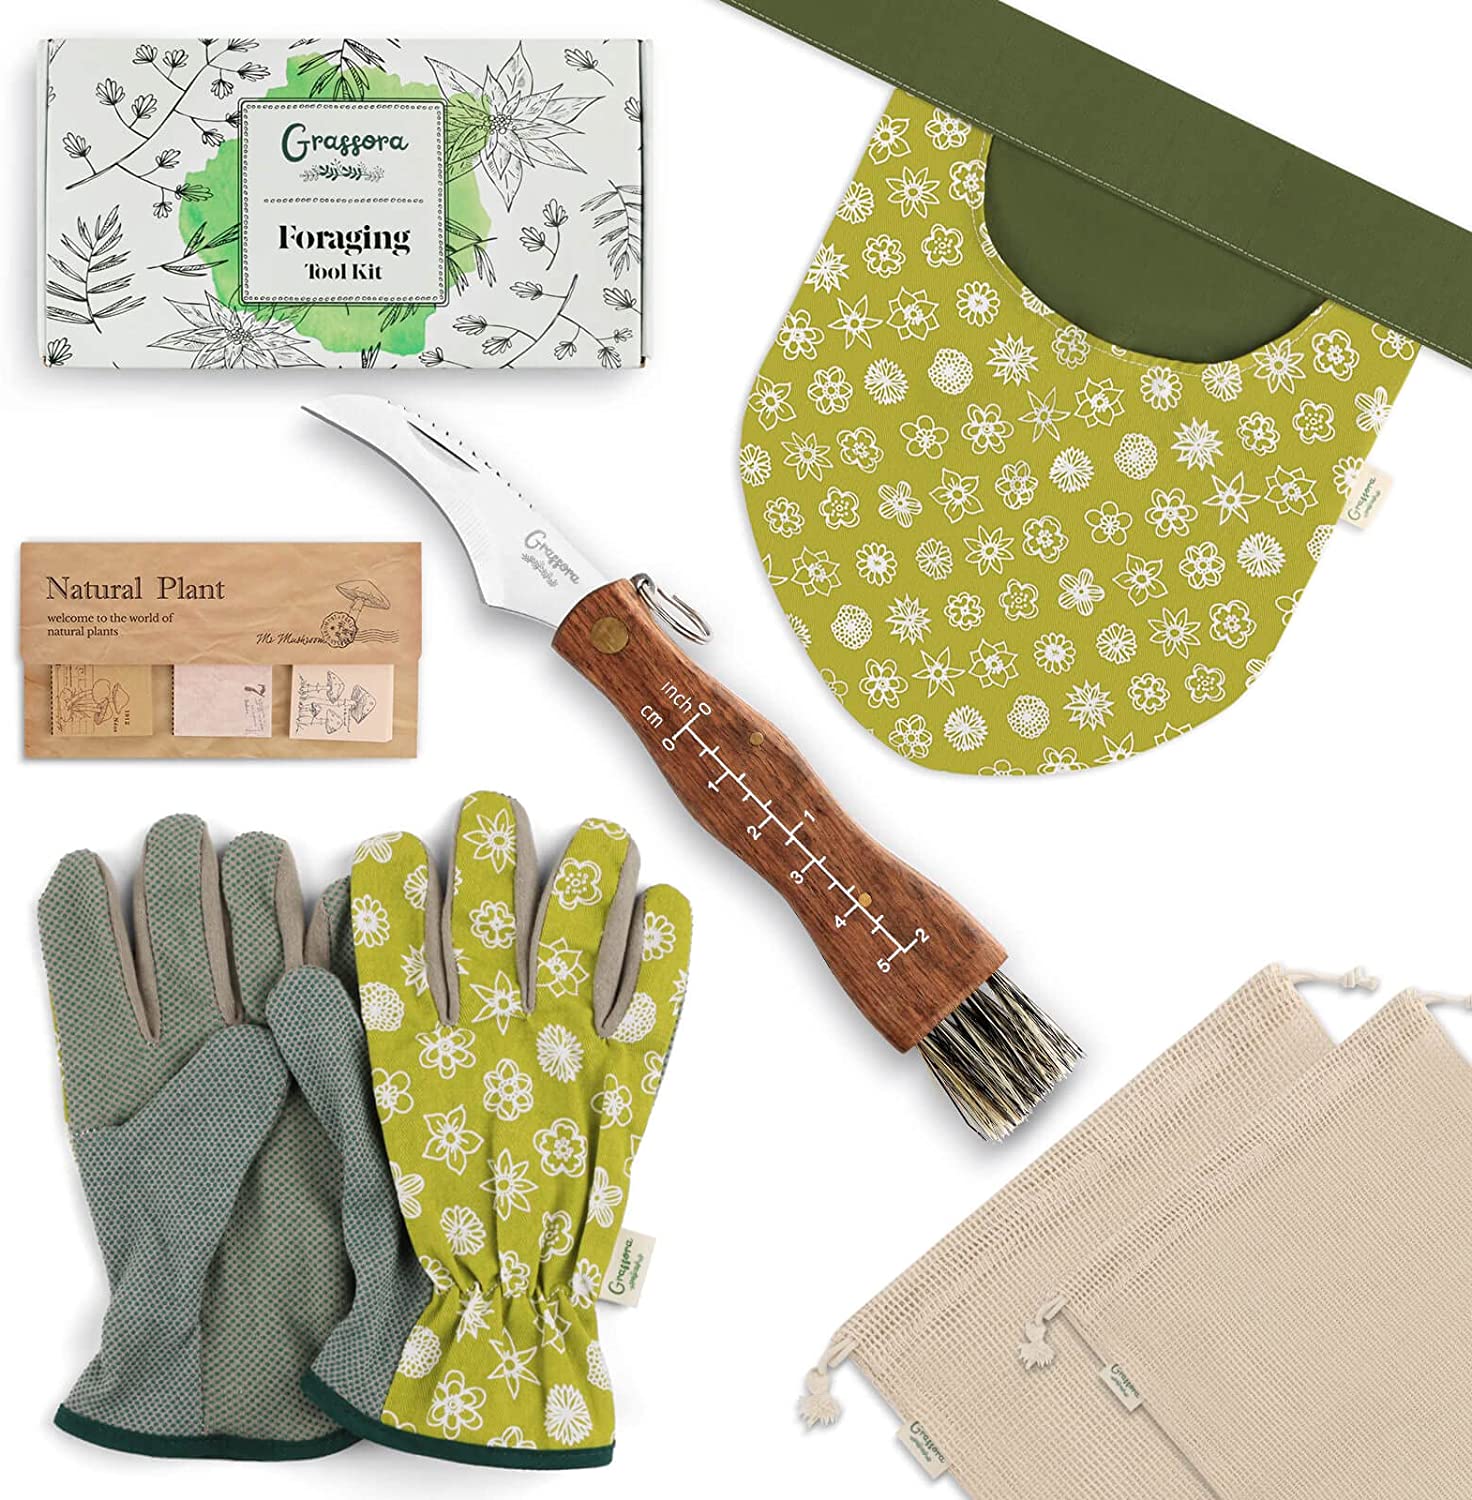 Grassora 6-in-1 Foraging Kit with Mushroom Mesh Bags, Pounch, Knife, Gloves and Stickers, for Beginners Pros, Hunting Supplies Foragers’ Gift, Army Green